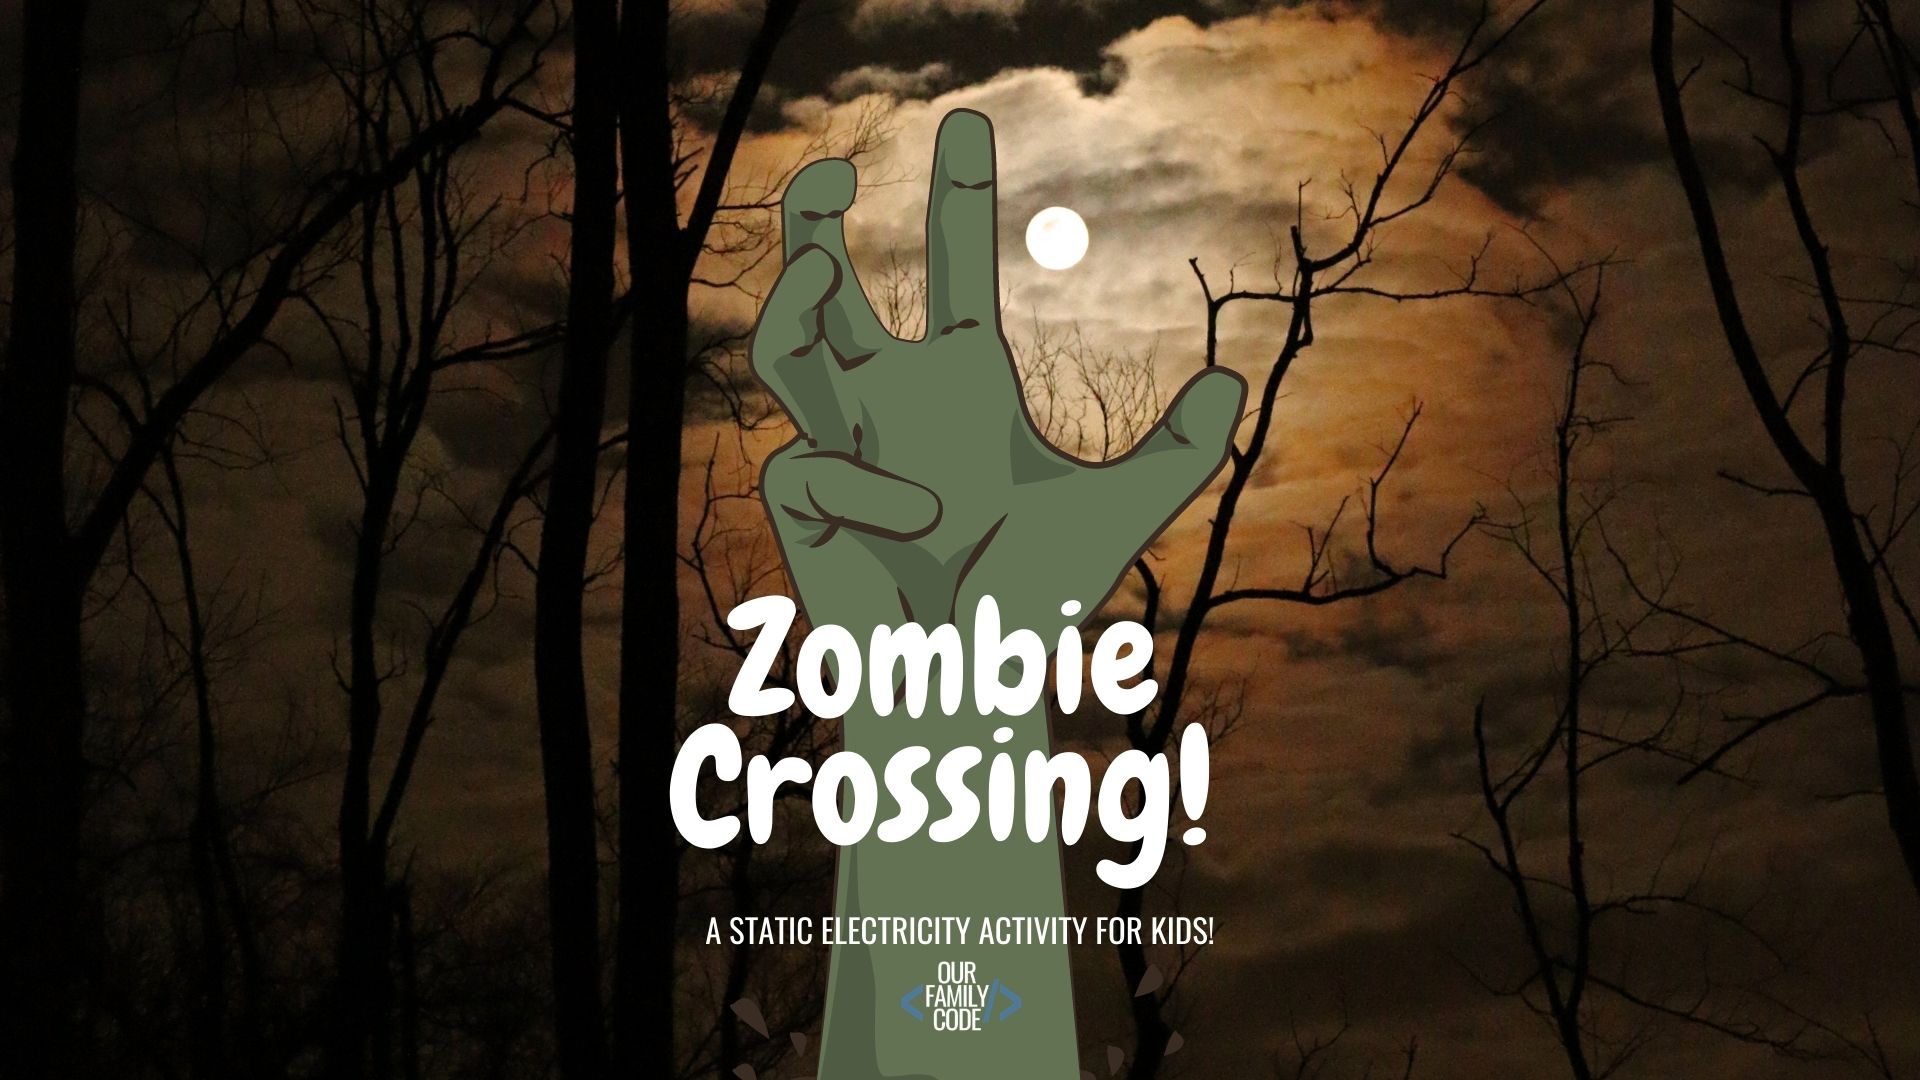 This static electricity zombie crossing STEAM activity is super easy and eerily fun! With only a few supplies needed, your walking dead will be up and moving in no time! #STEAMkids #STEM #STEMactivities #STEAMlearning #HalloweenSTEM